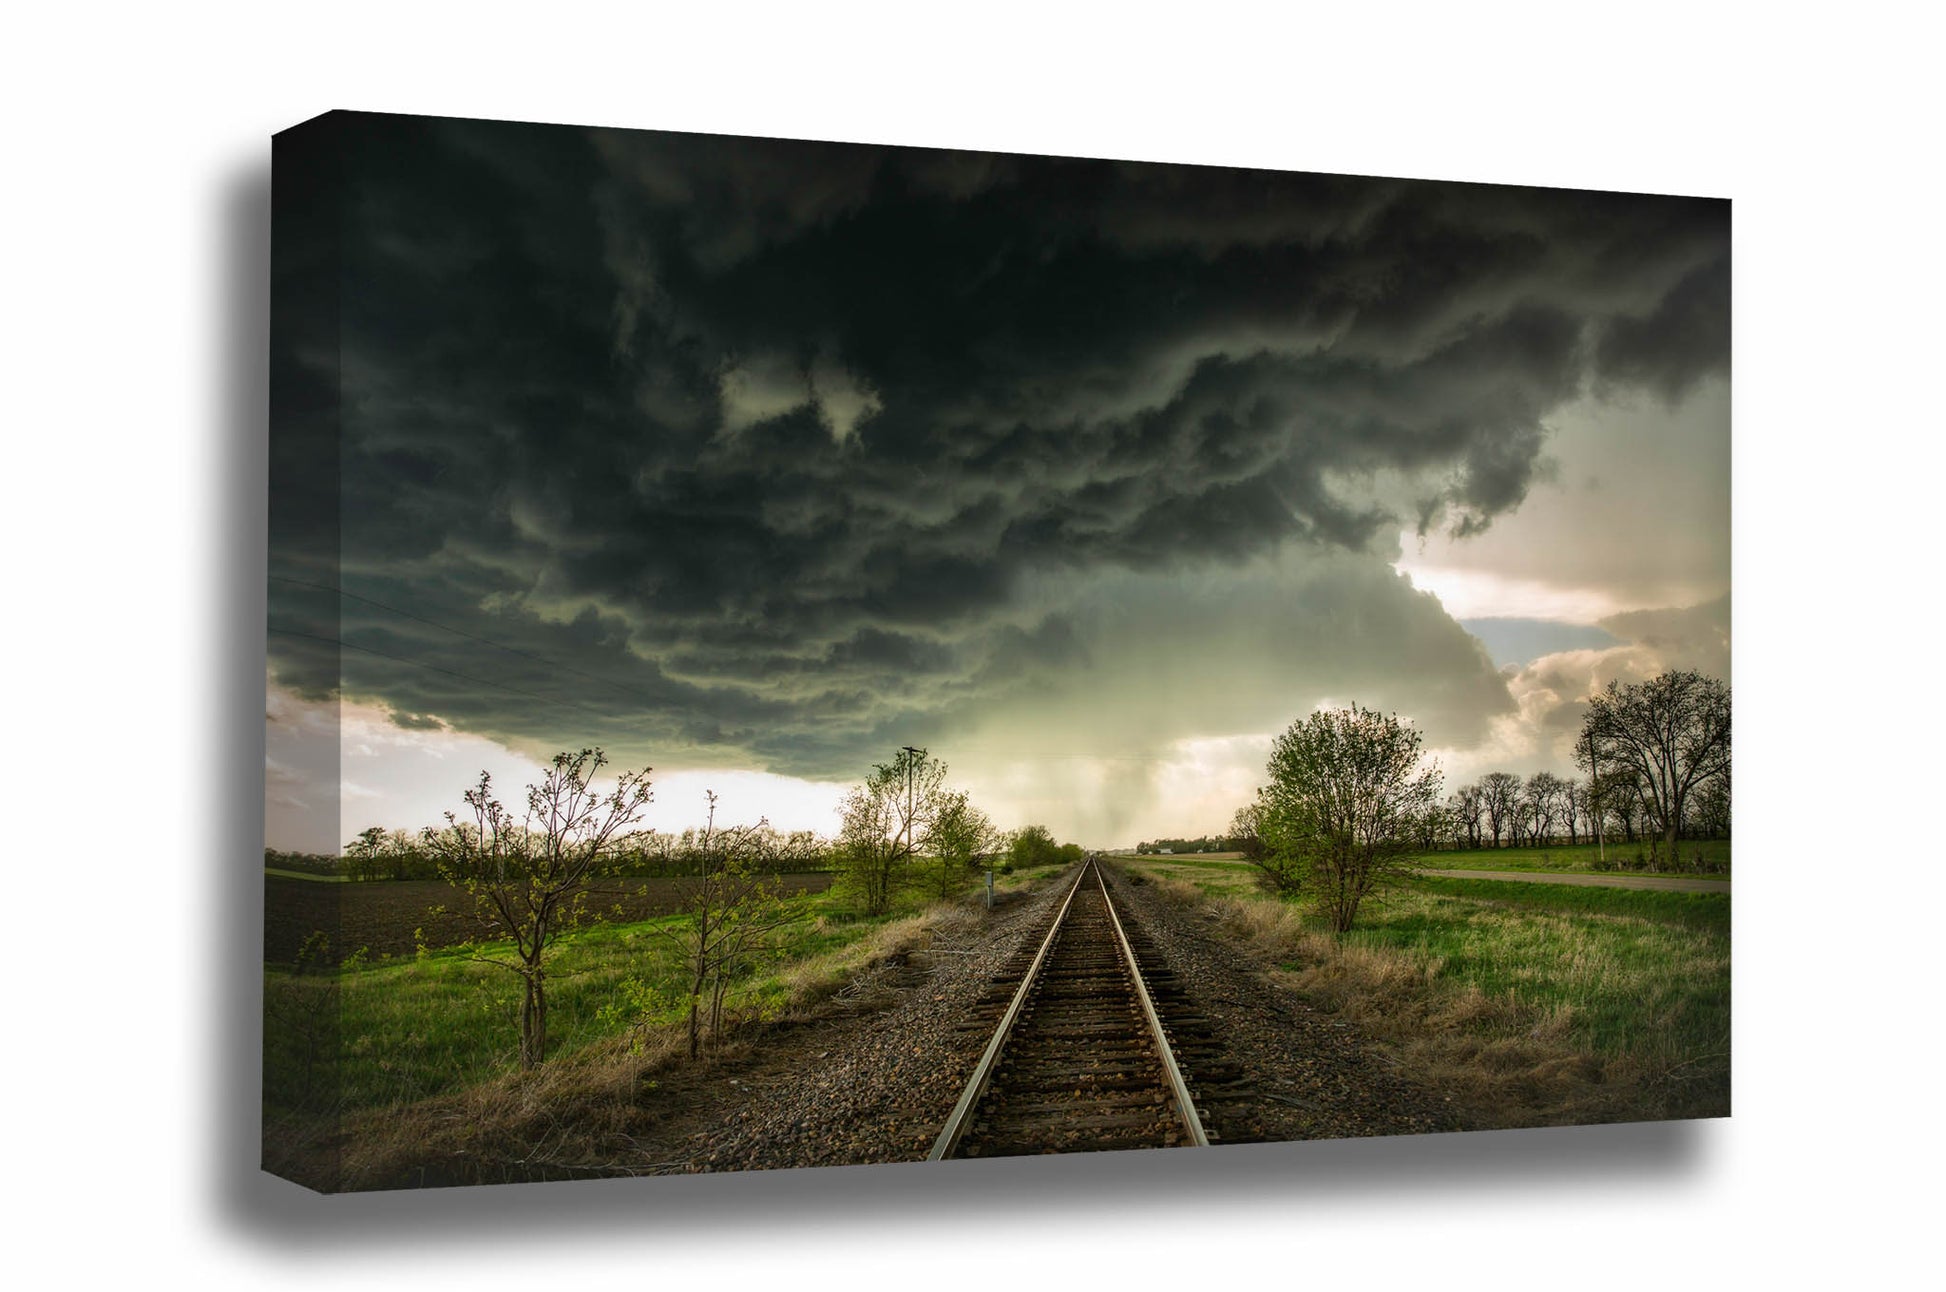 Thunderstorm canvas wall art of dark storm clouds over railroad tracks on a stormy spring day in Kansas by Sean Ramsey of Southern Plains Photography.